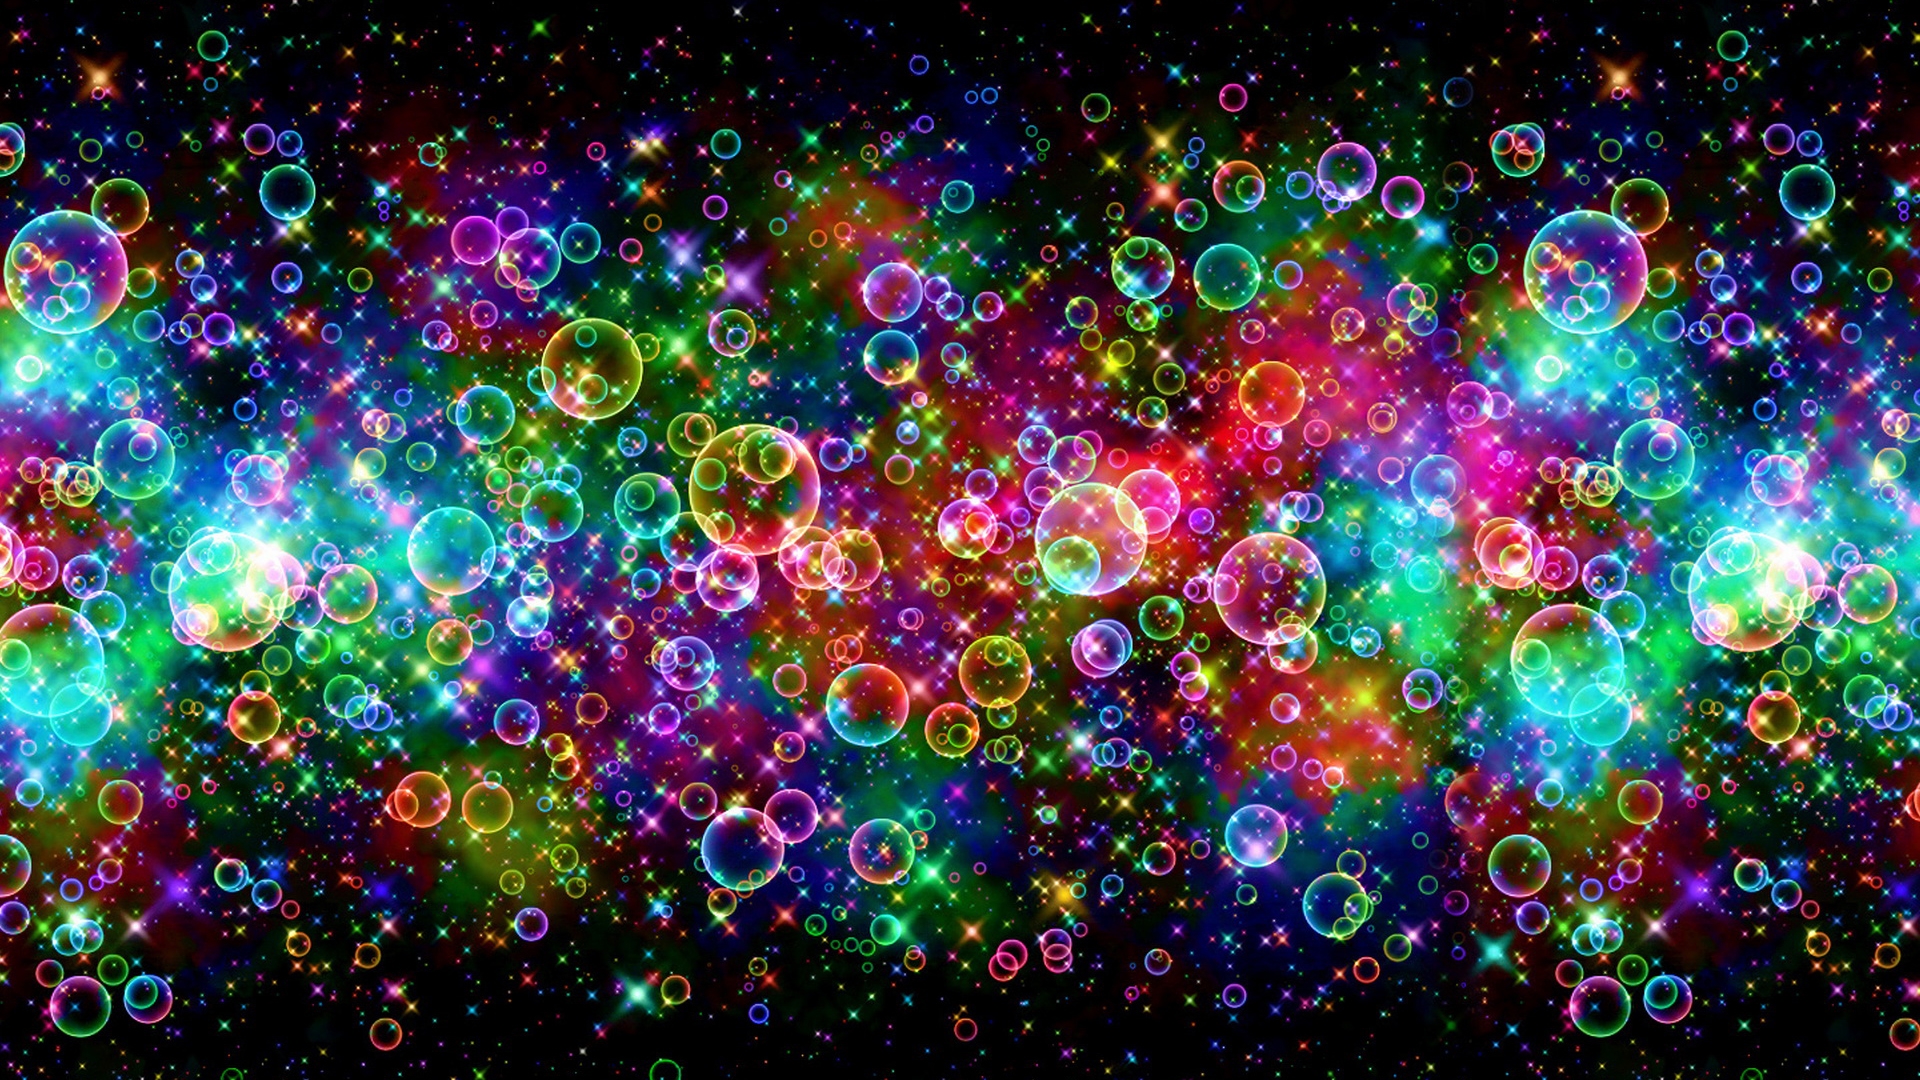 Colorful Wallpaper Best